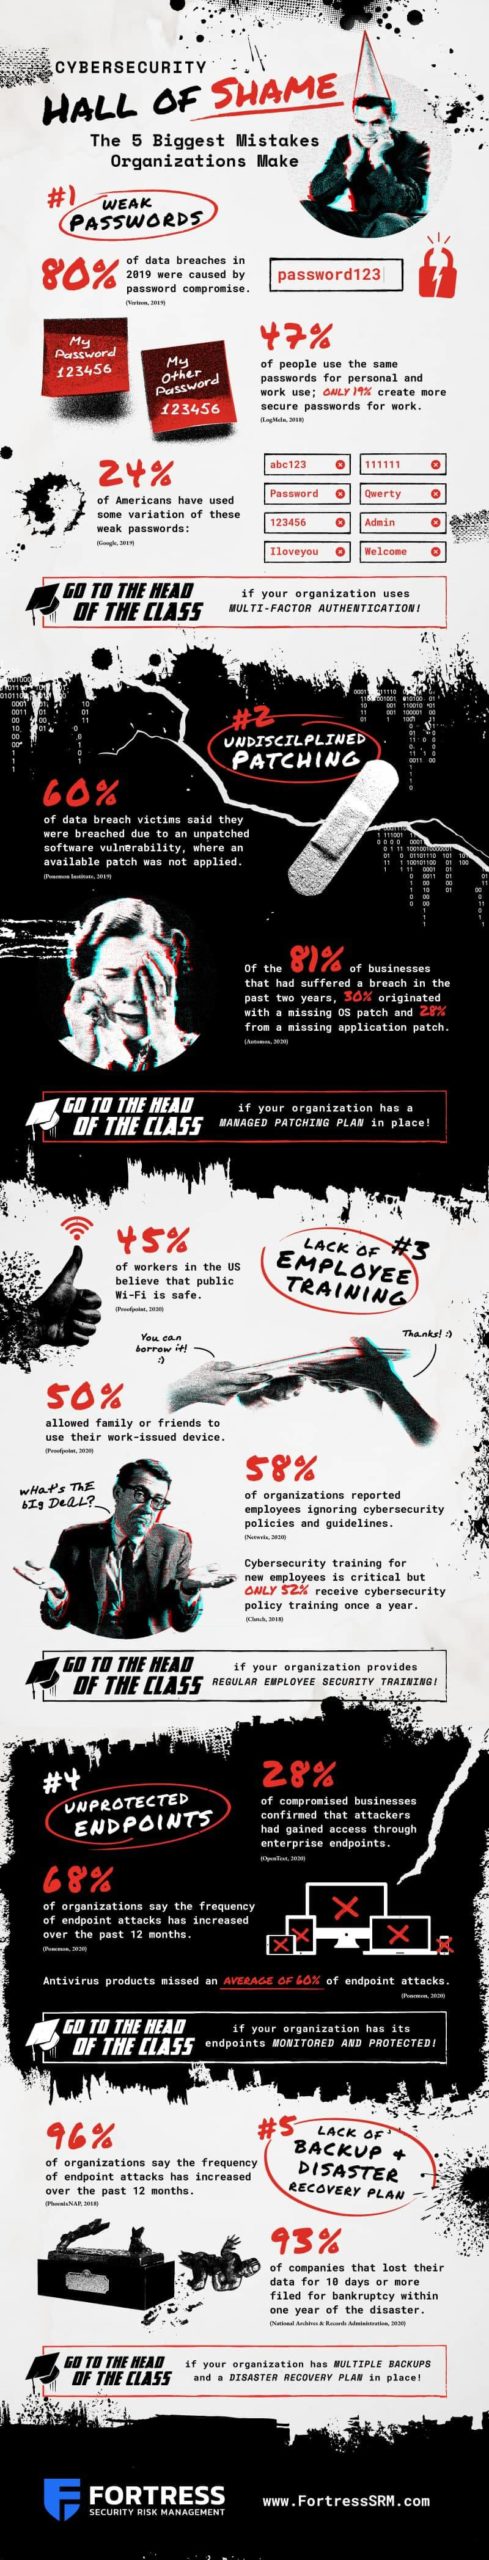 Cybersecurity Hall of Shame Infographic